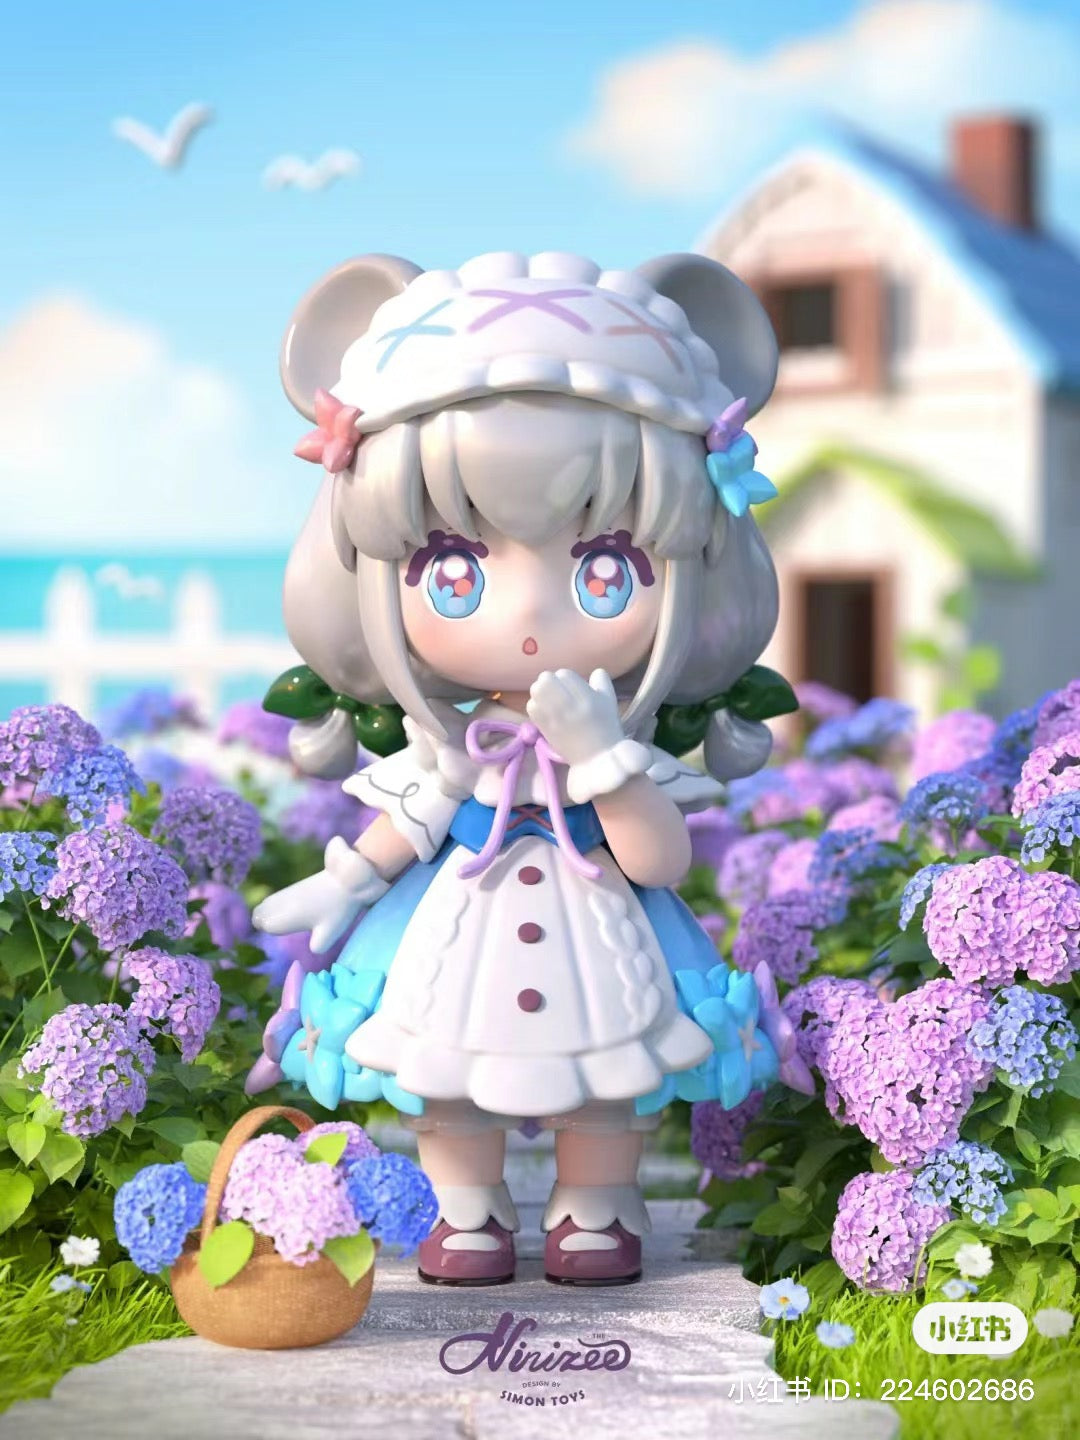 Alt text: NINIZEE The Secret Realm of Flowers Blind Box Series featuring cartoon figurine in a garden with flowers.